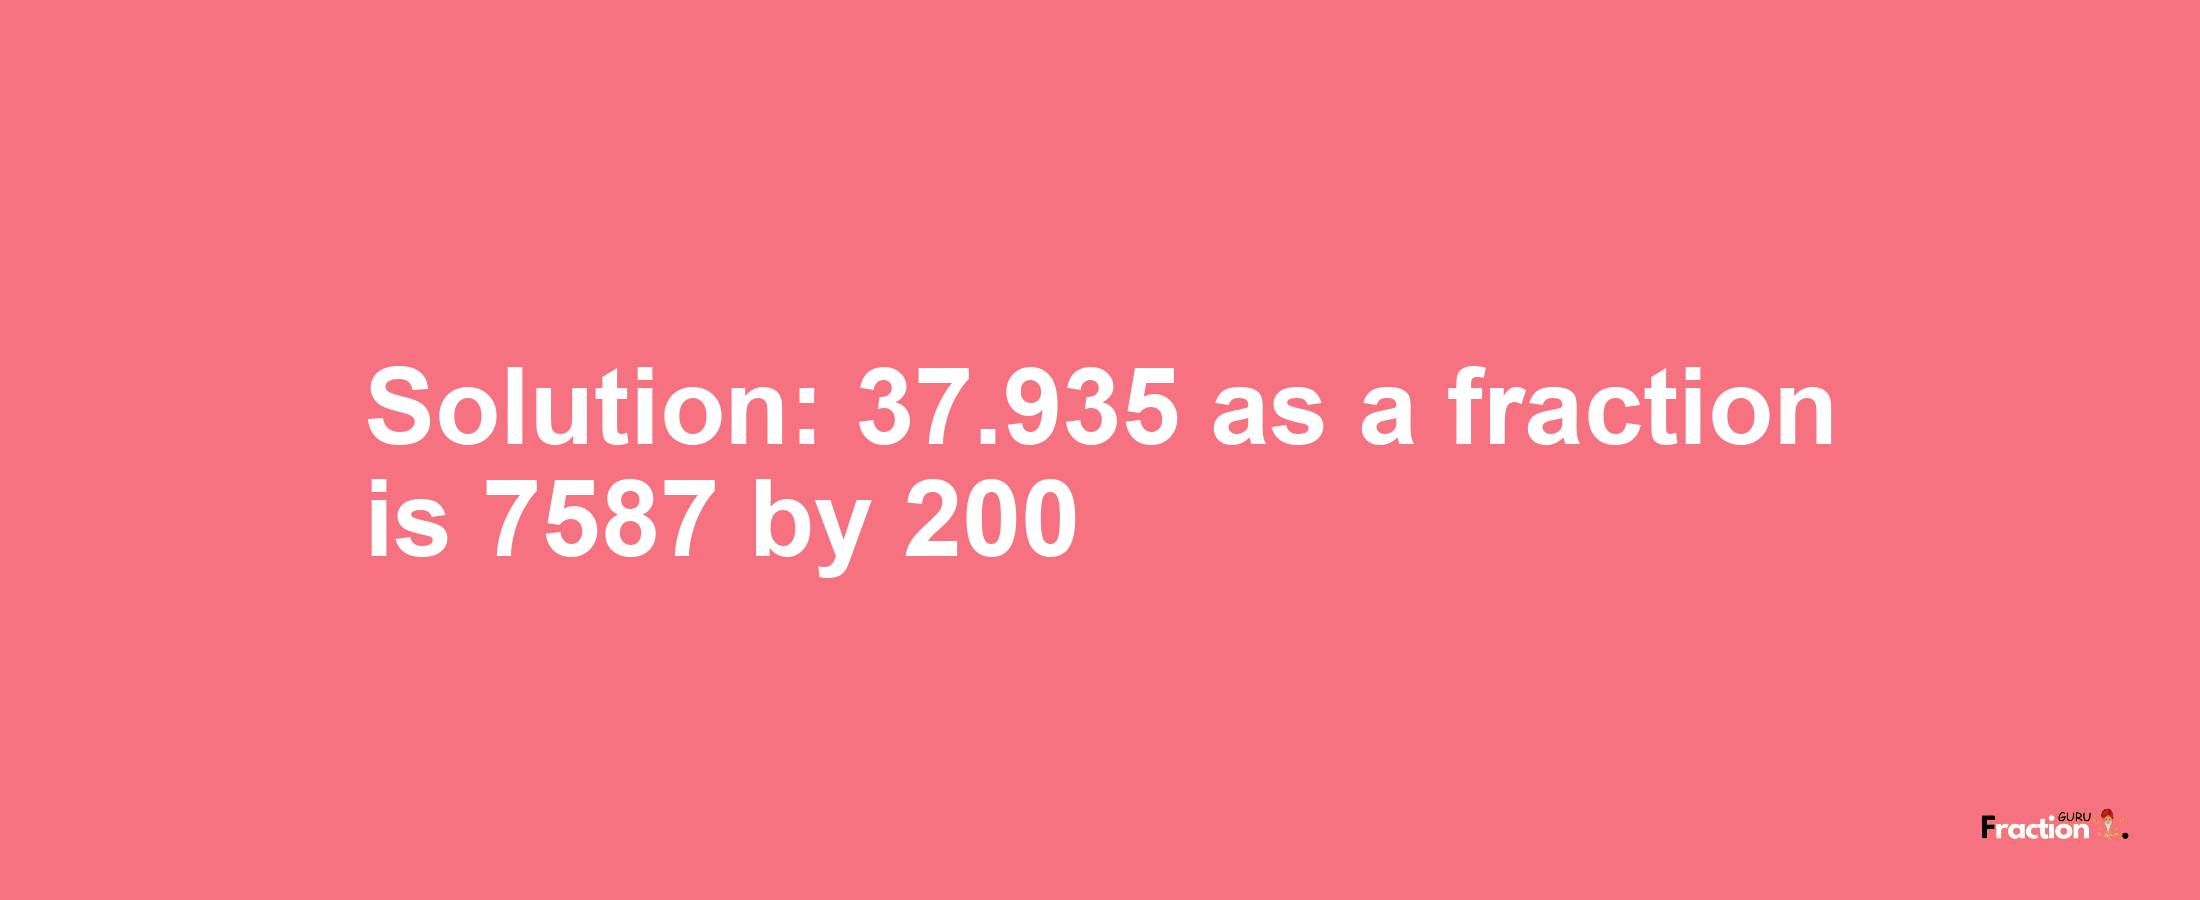 Solution:37.935 as a fraction is 7587/200